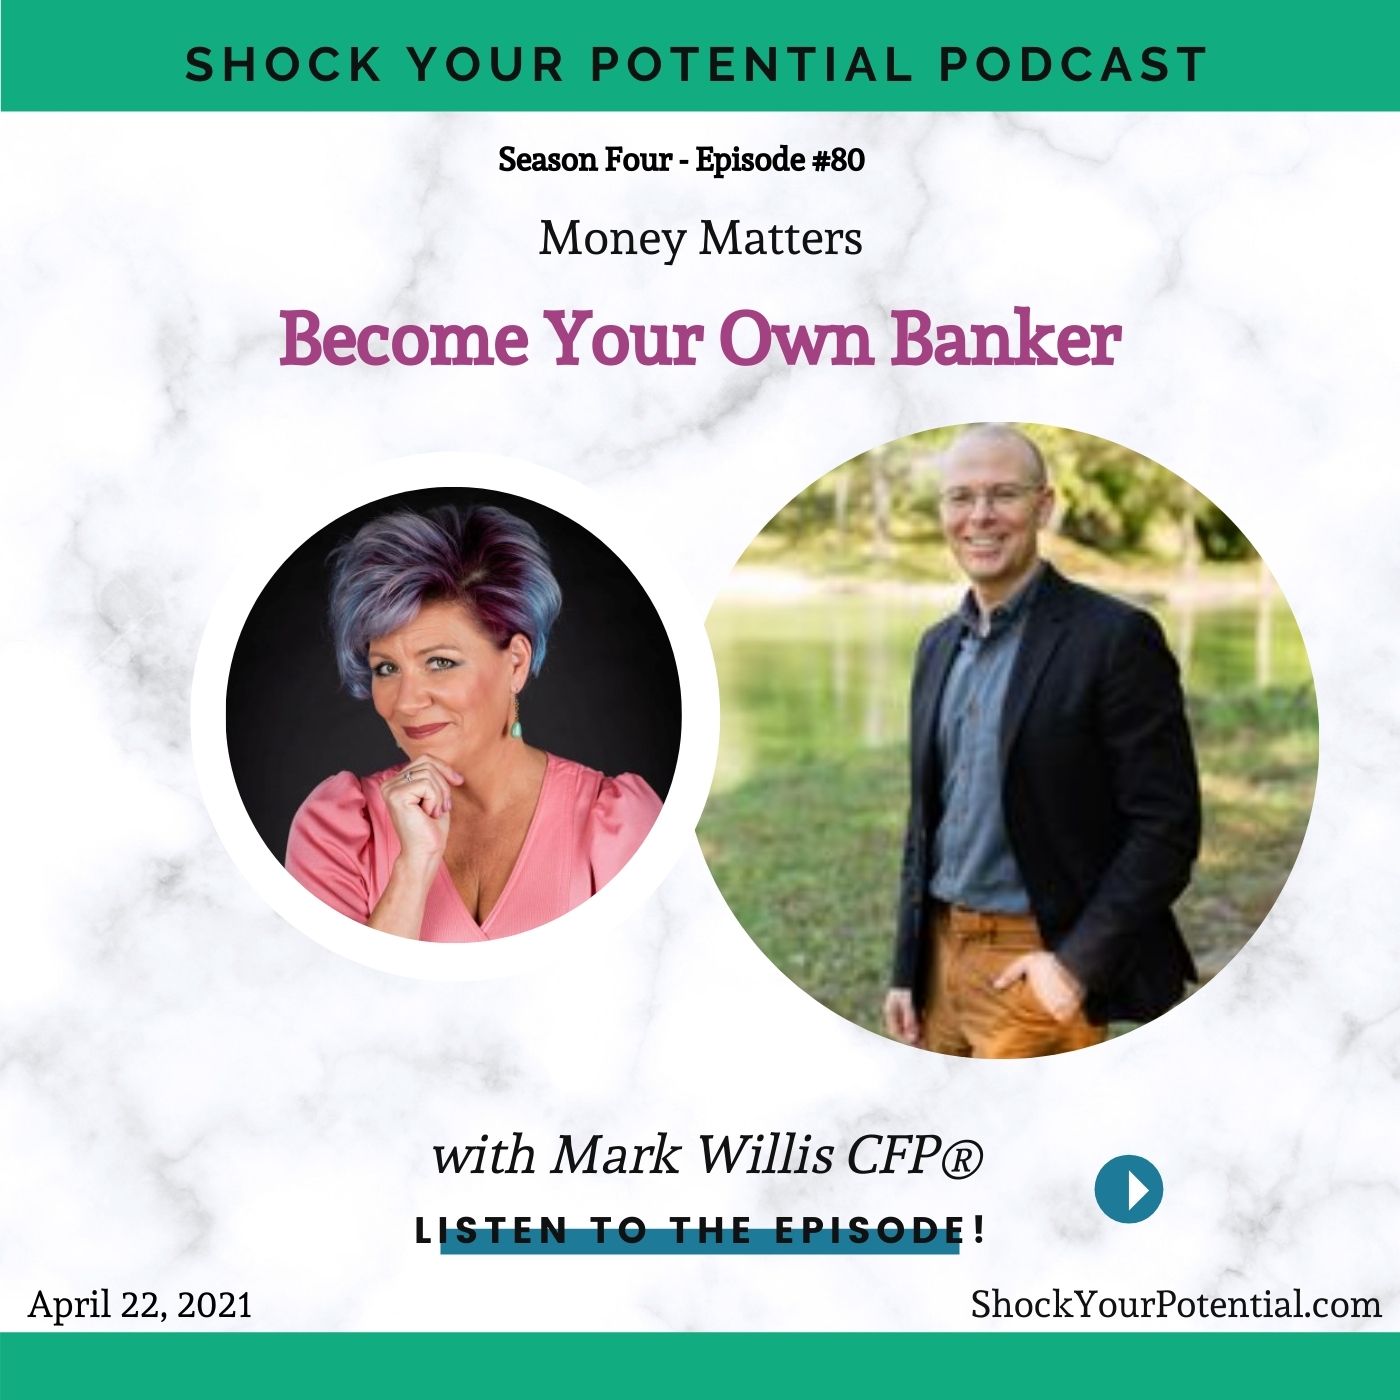 Become Your Own Banker – Mark Willis CFP®